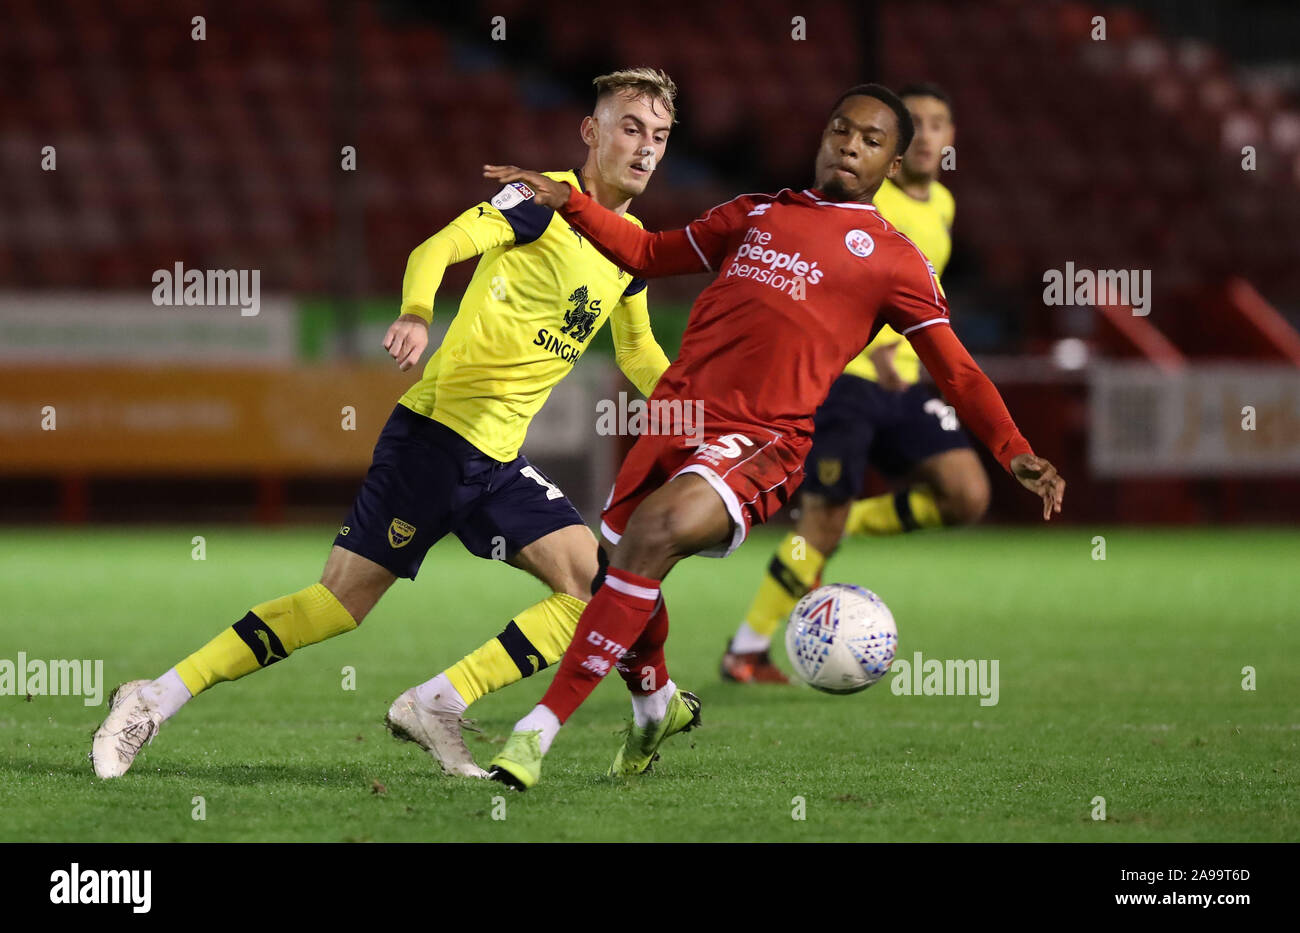 Crawley Town's Ashley Nathaniel-George vies for the ball against Oxford's Mark Sykes during the Leasing.com Trophy match between Crawley Town and Oxford United at the Peoples Pension Stadium in Crawley. 12 November 2019 Stock Photo